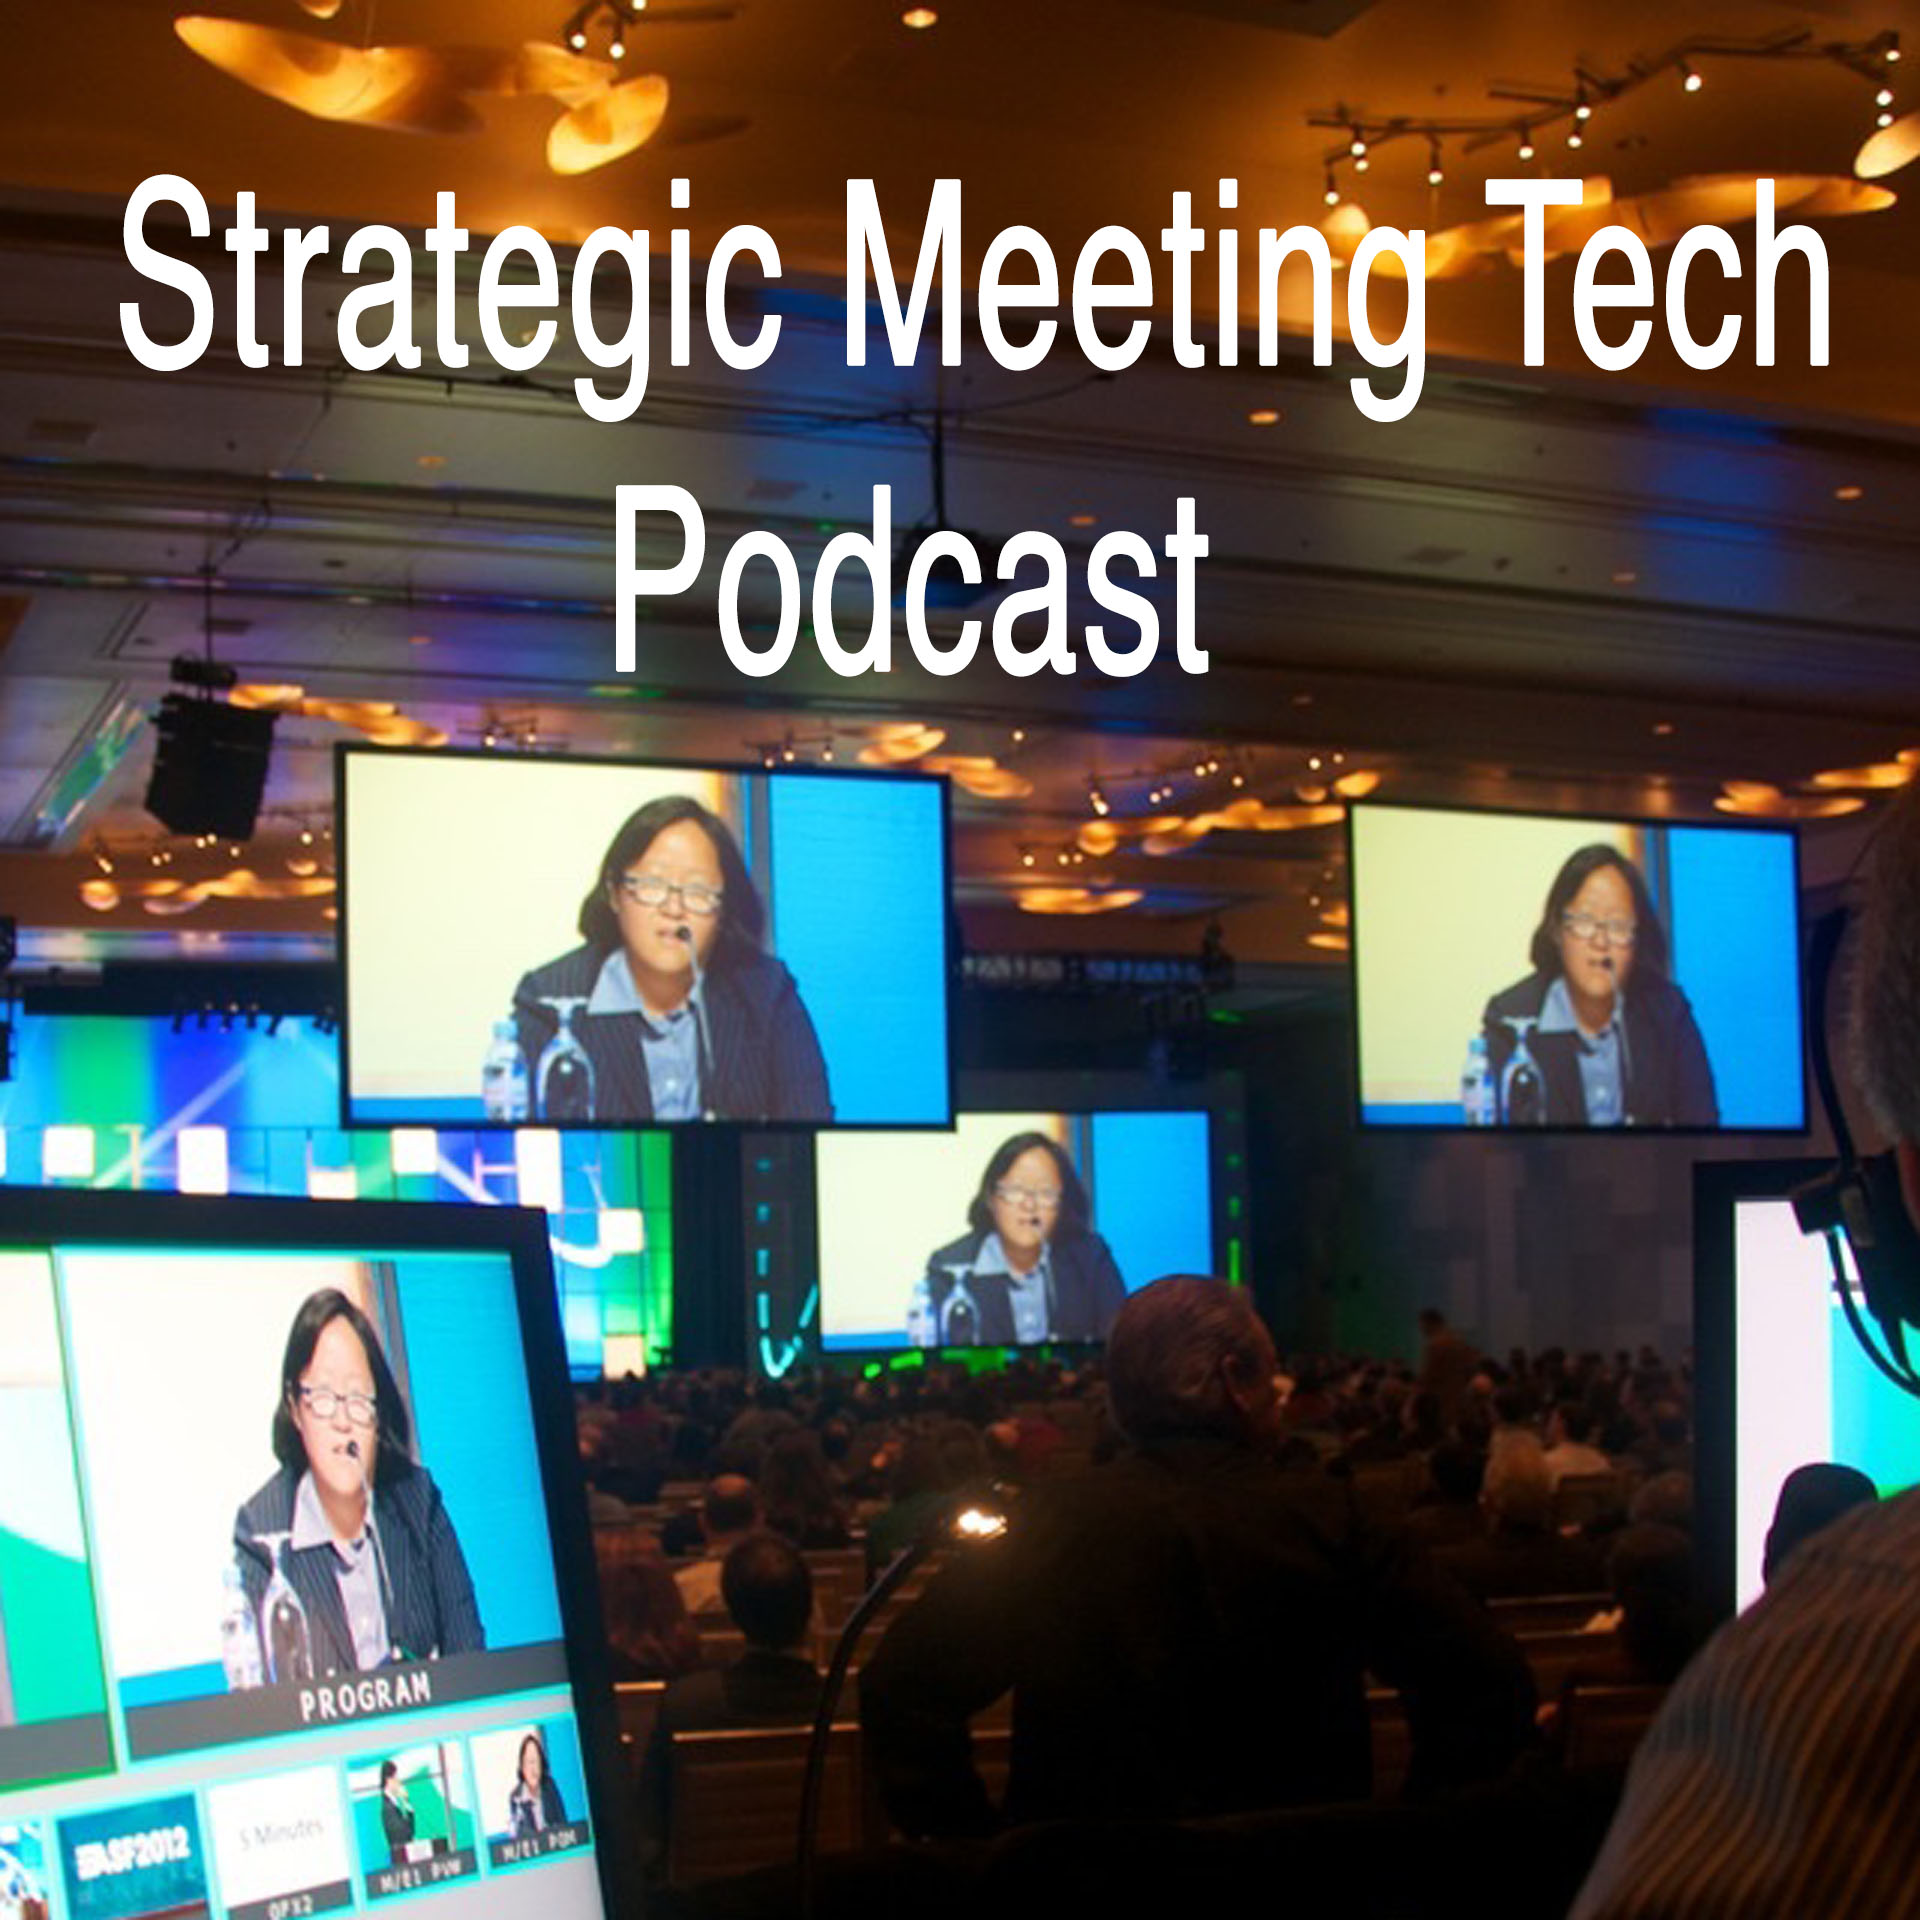 Strategic Meeting Tech Podcast Show #25 - AV Quote Tips and news about a webinar later this month